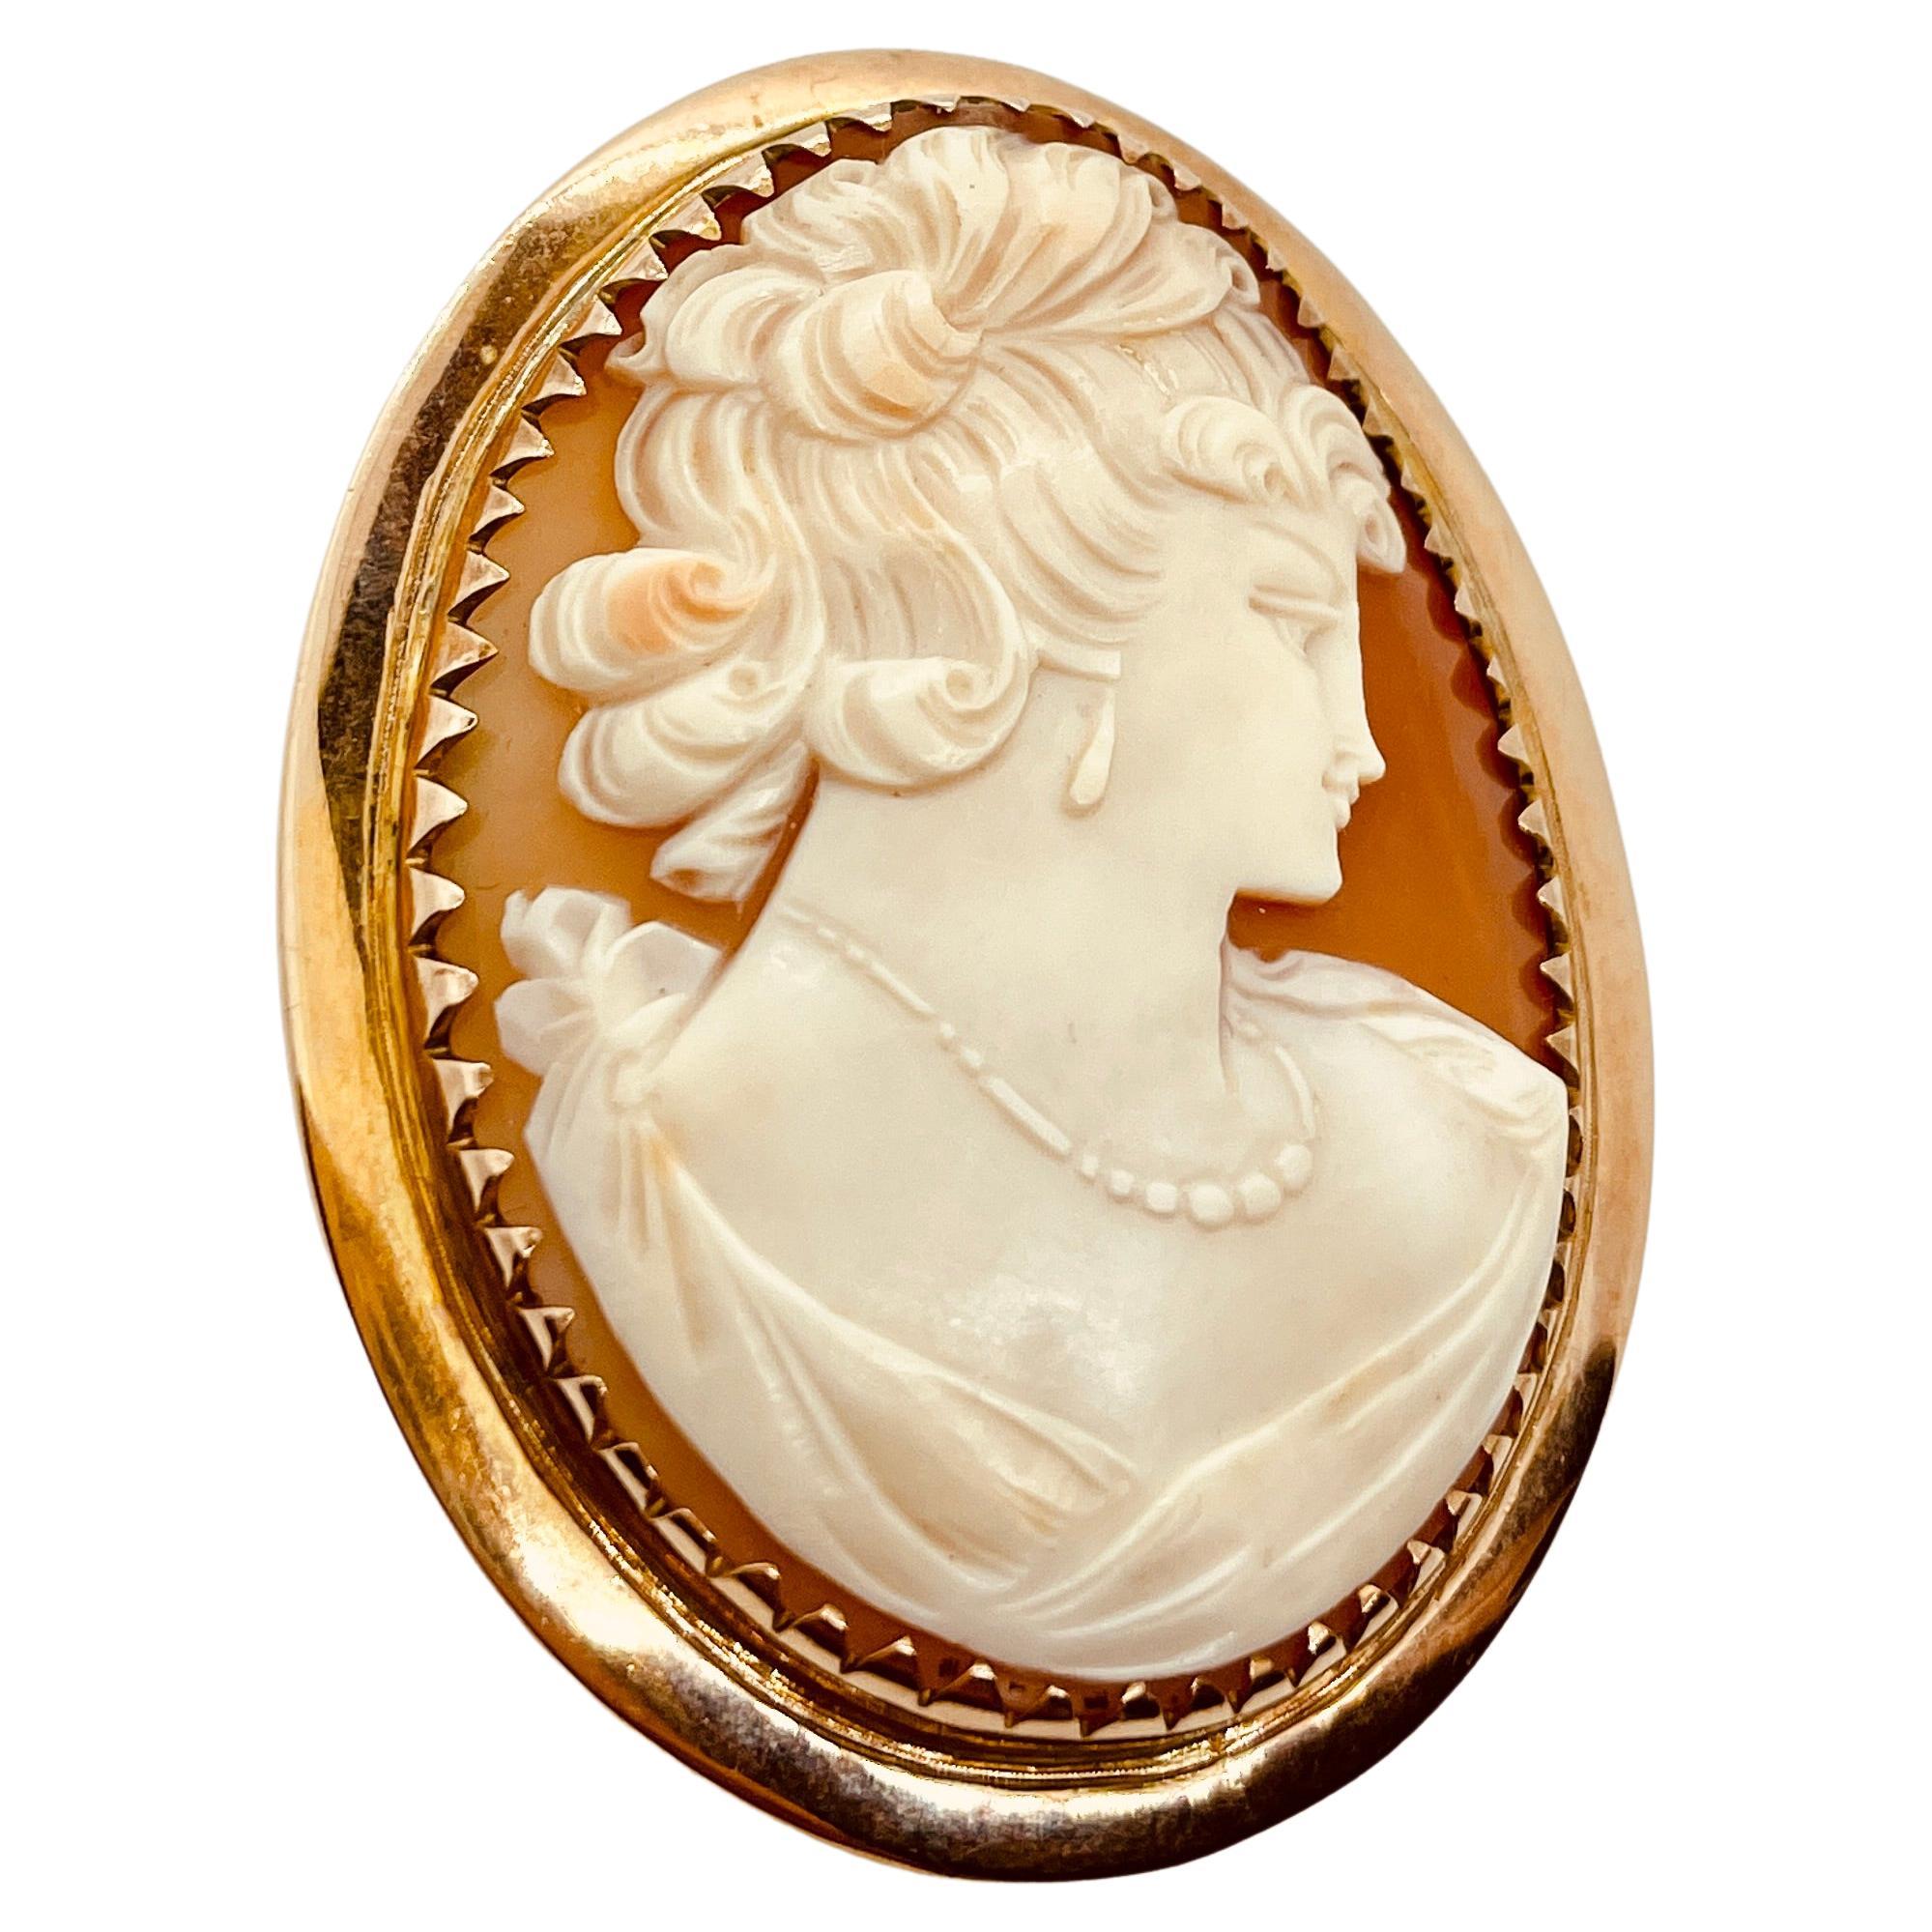 The Lady Wearing Jewels.
This vintage brooch features a Cameo that is hand carved in Sardonyx Shell (Conch shell) and depicts an elegant lady wearing a necklace and earrings.  Her curls are upswept and she has a whimsical, Mona Lisa smile!  Circa